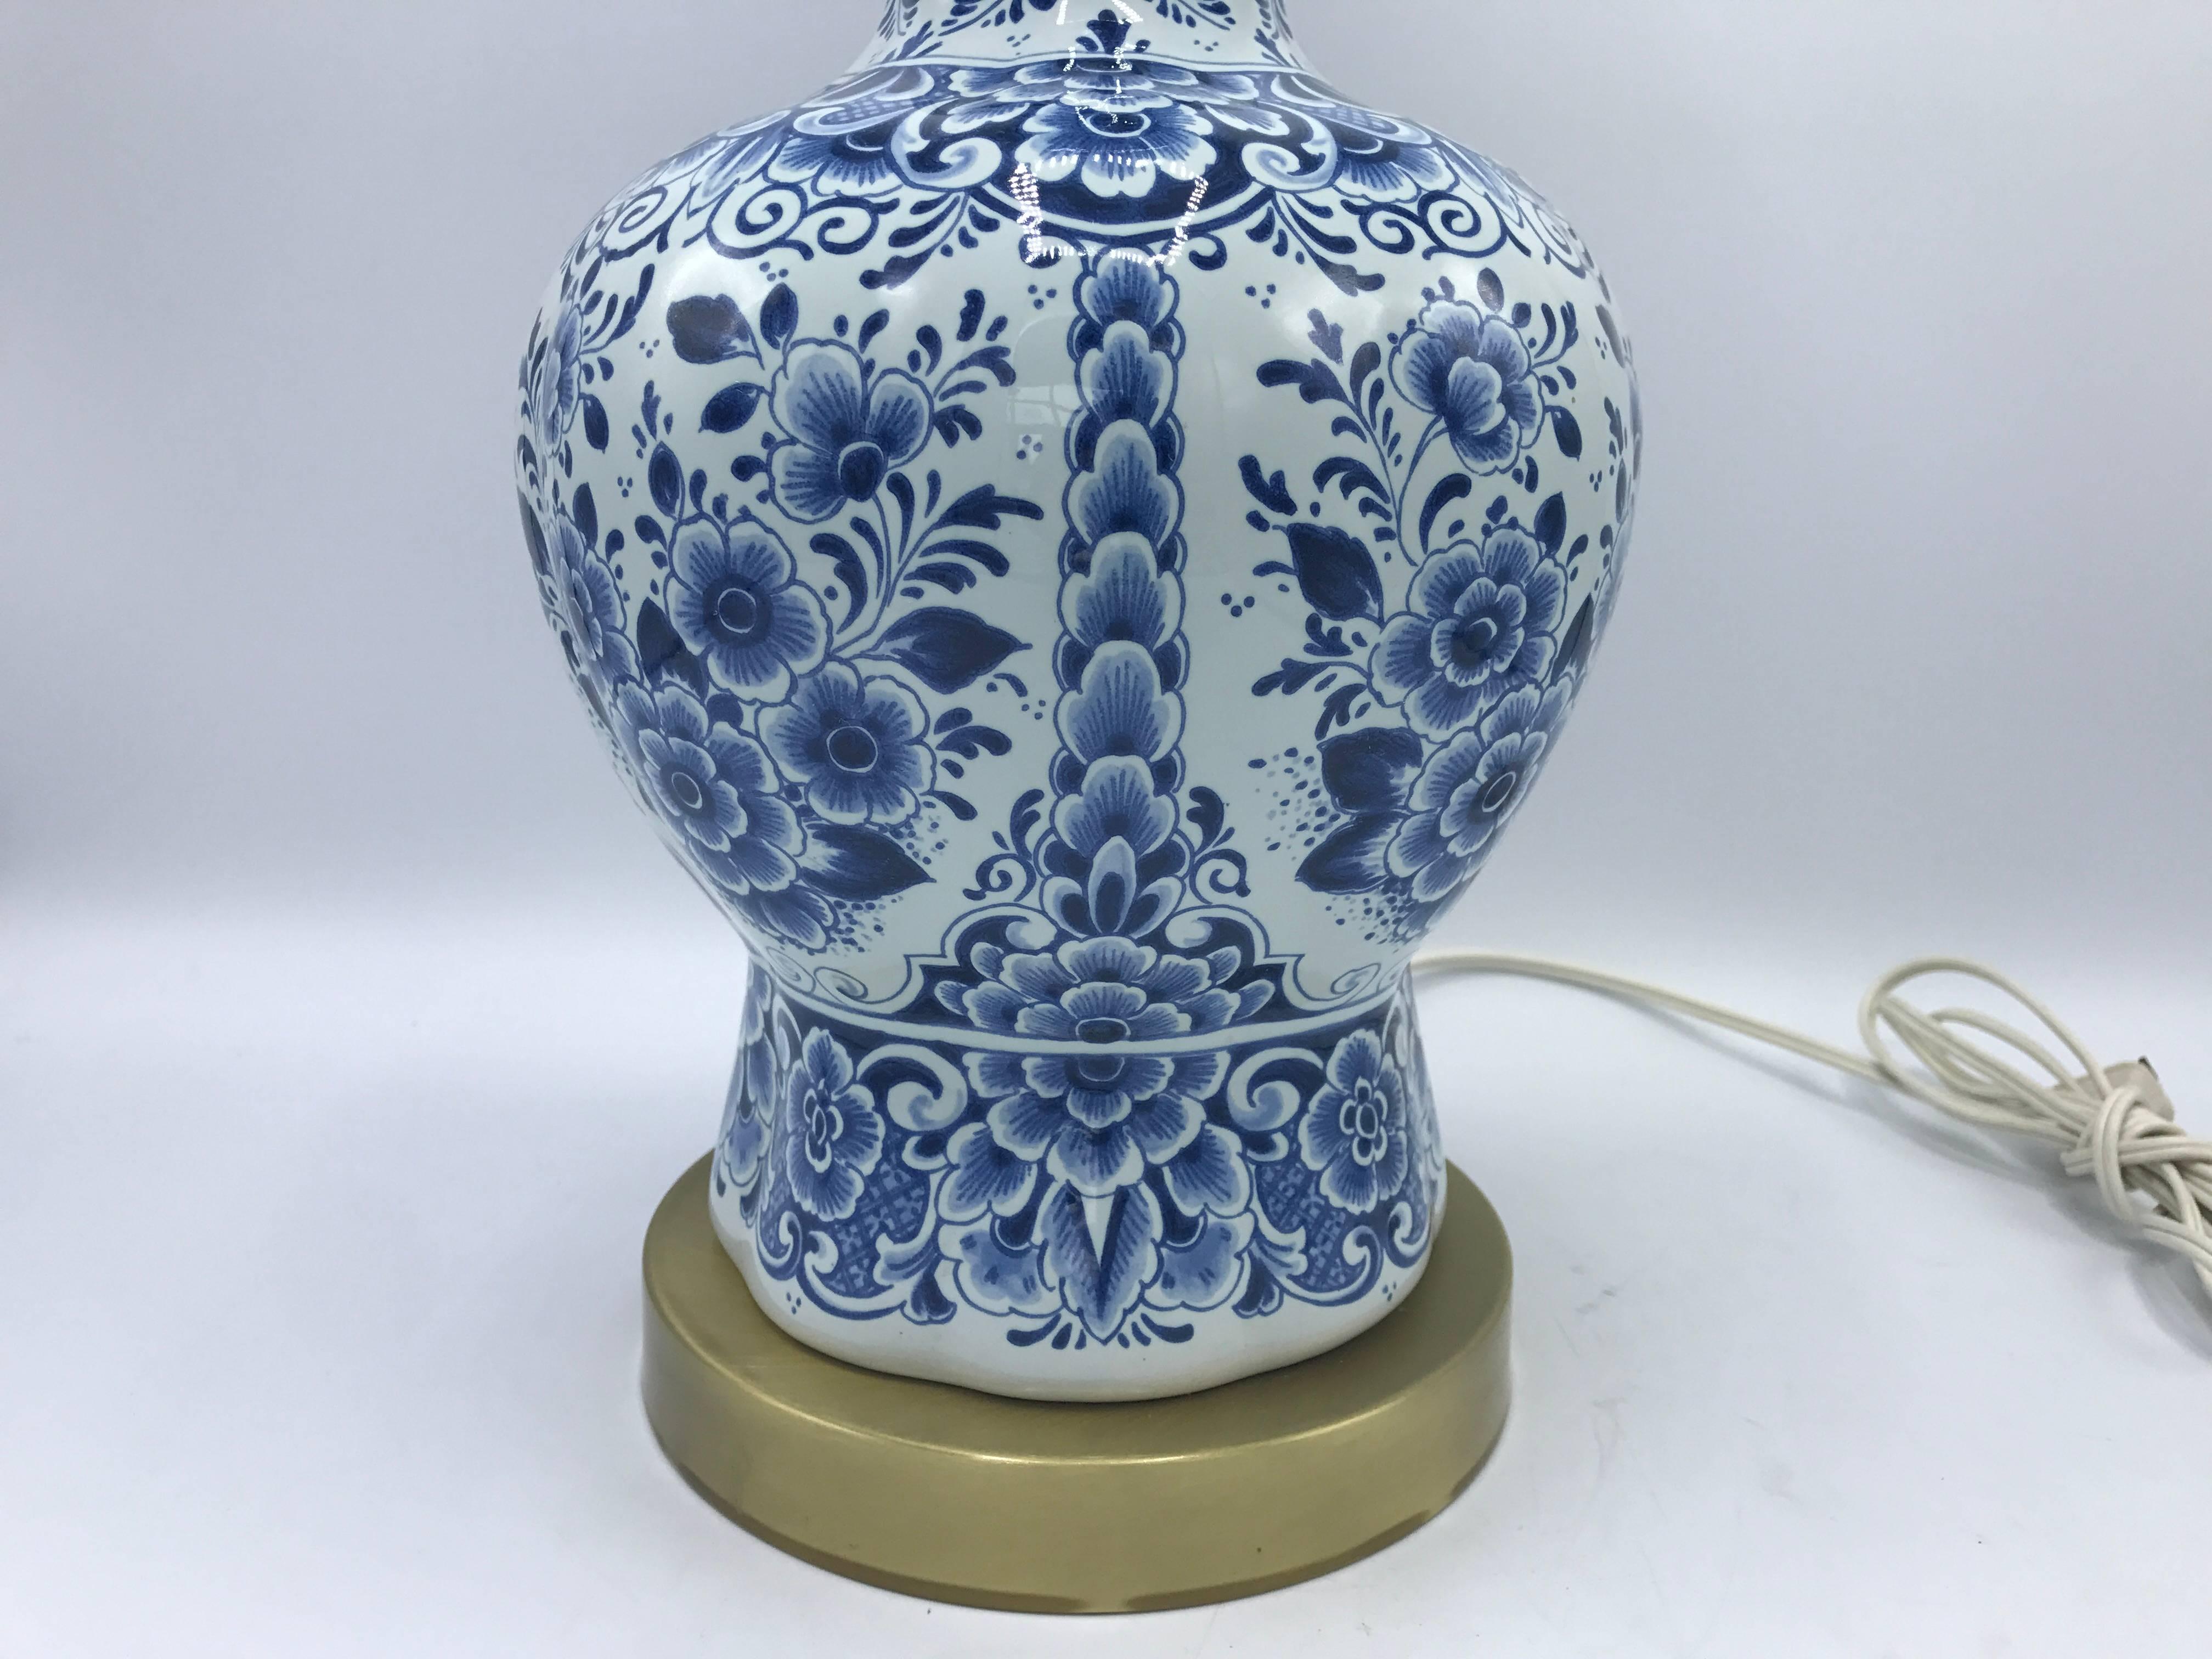 19th Century Delft Vase Lamp with a Blue and White Floral Motif on Brass Base 4